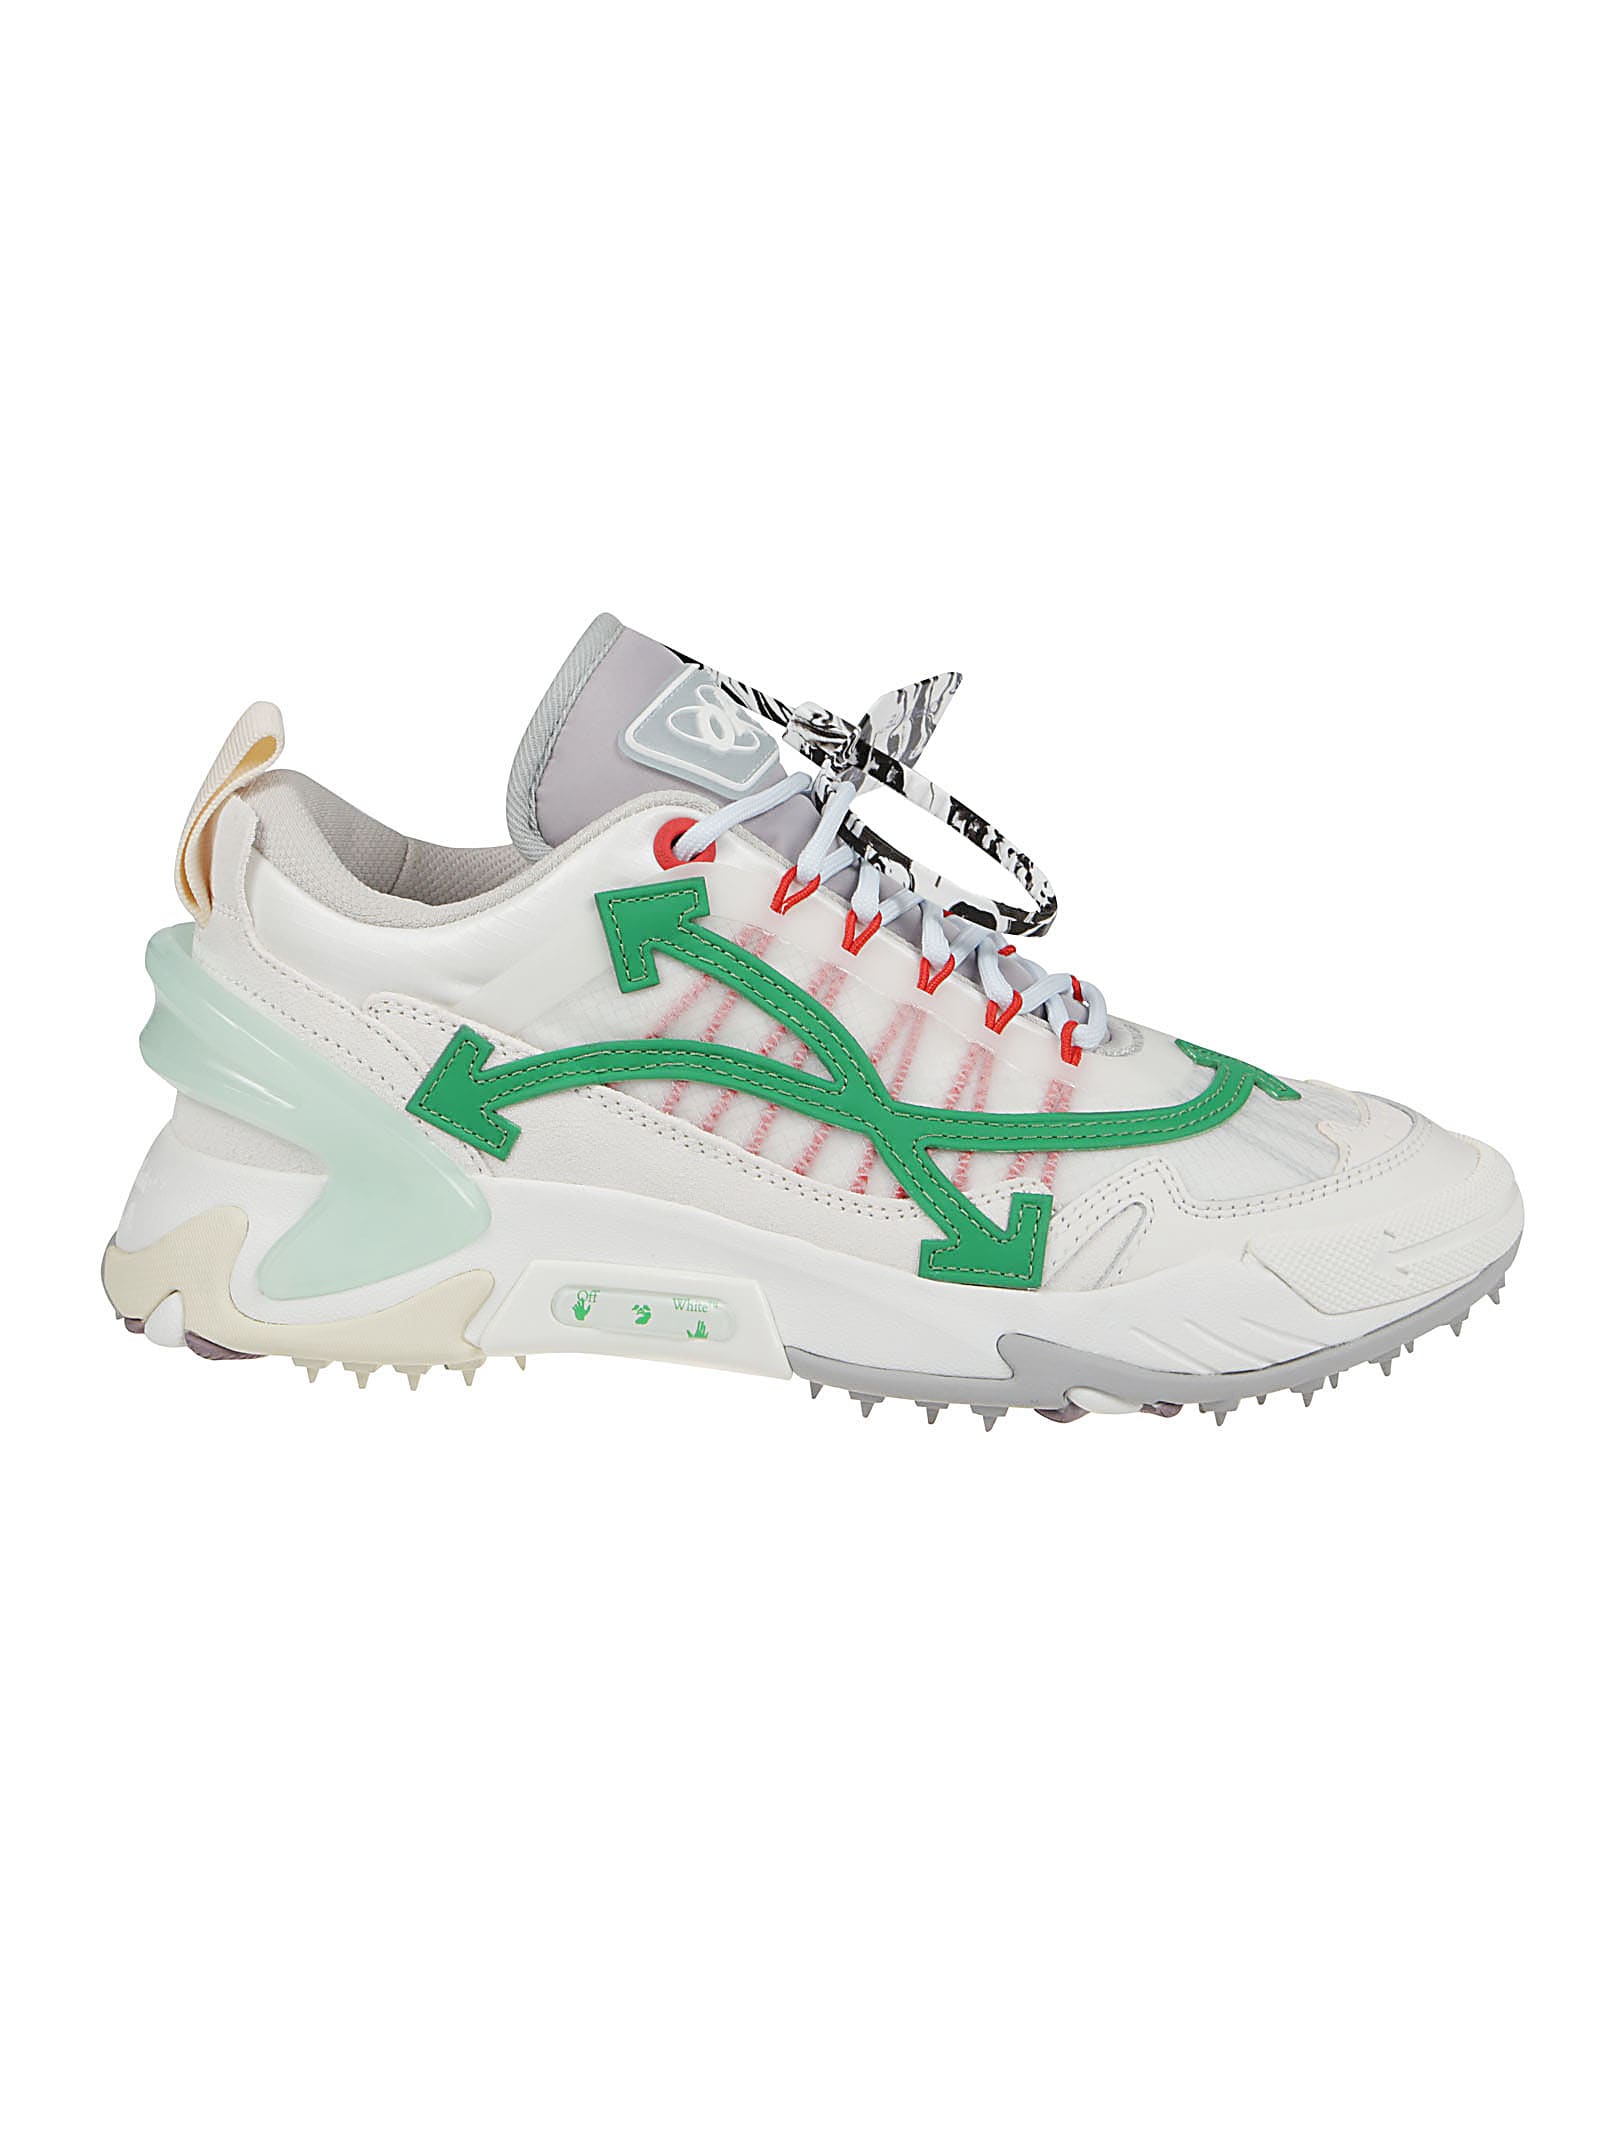 OFF-WHITE SNEAKERS ODSY 2000,OMIA190R21FAB001 0155 WHITE GREEN